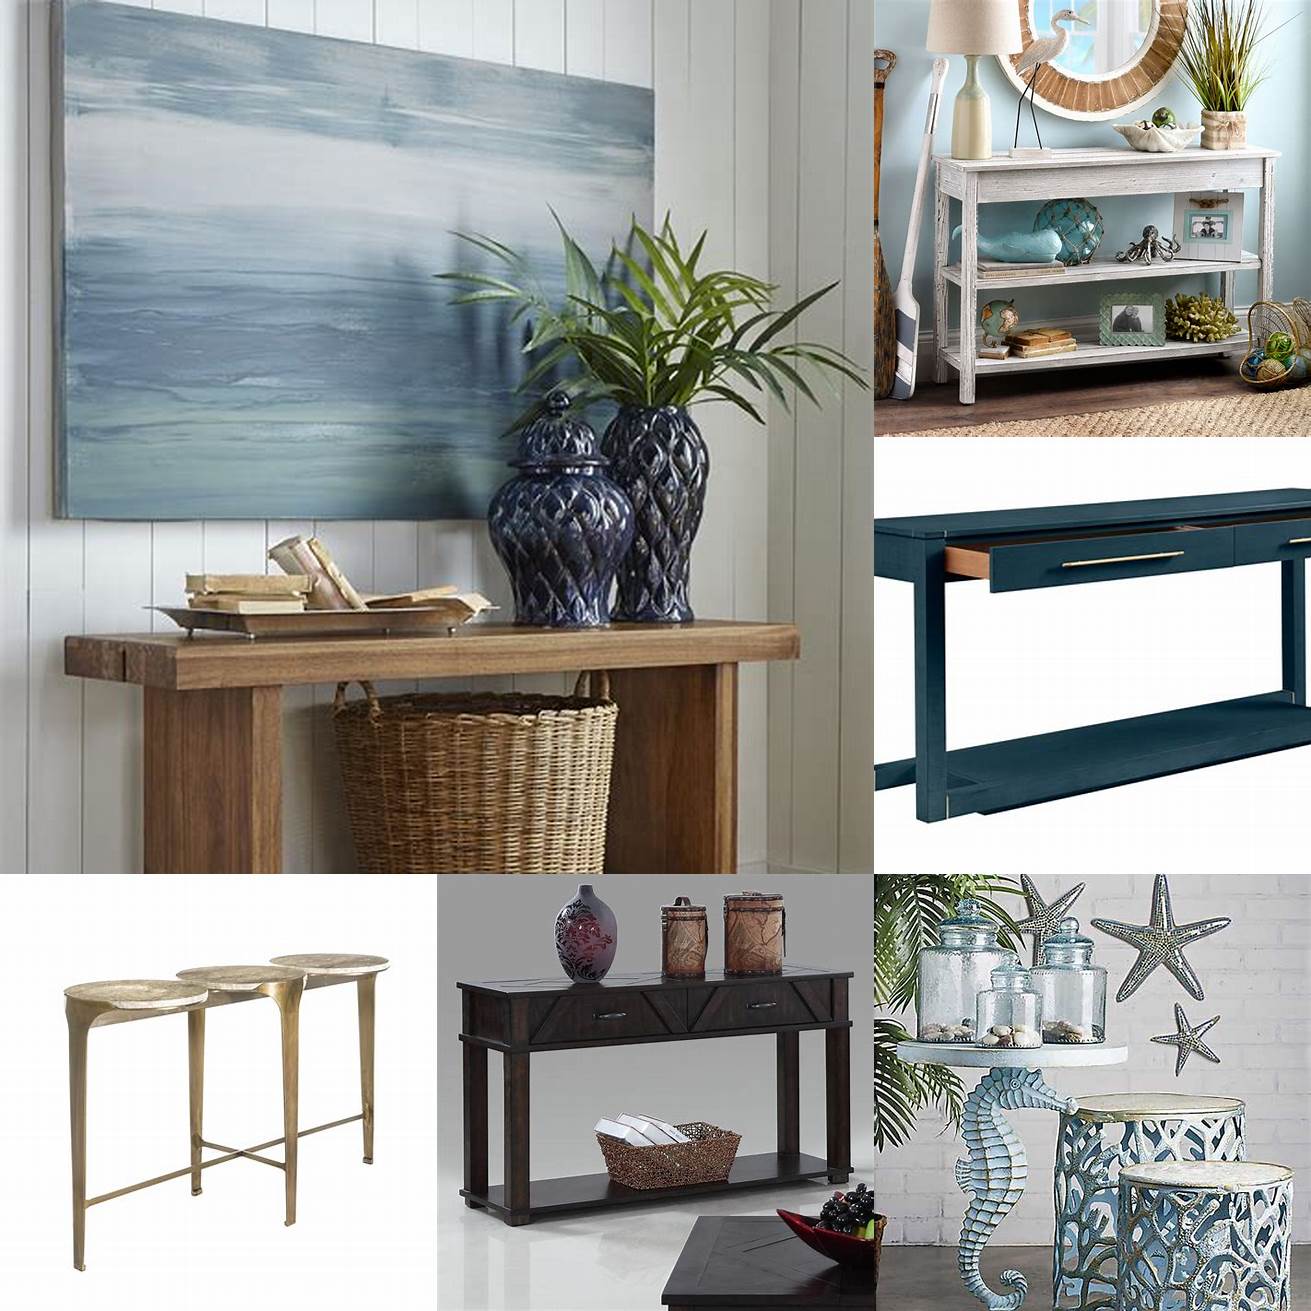 The Oceanic Console Table